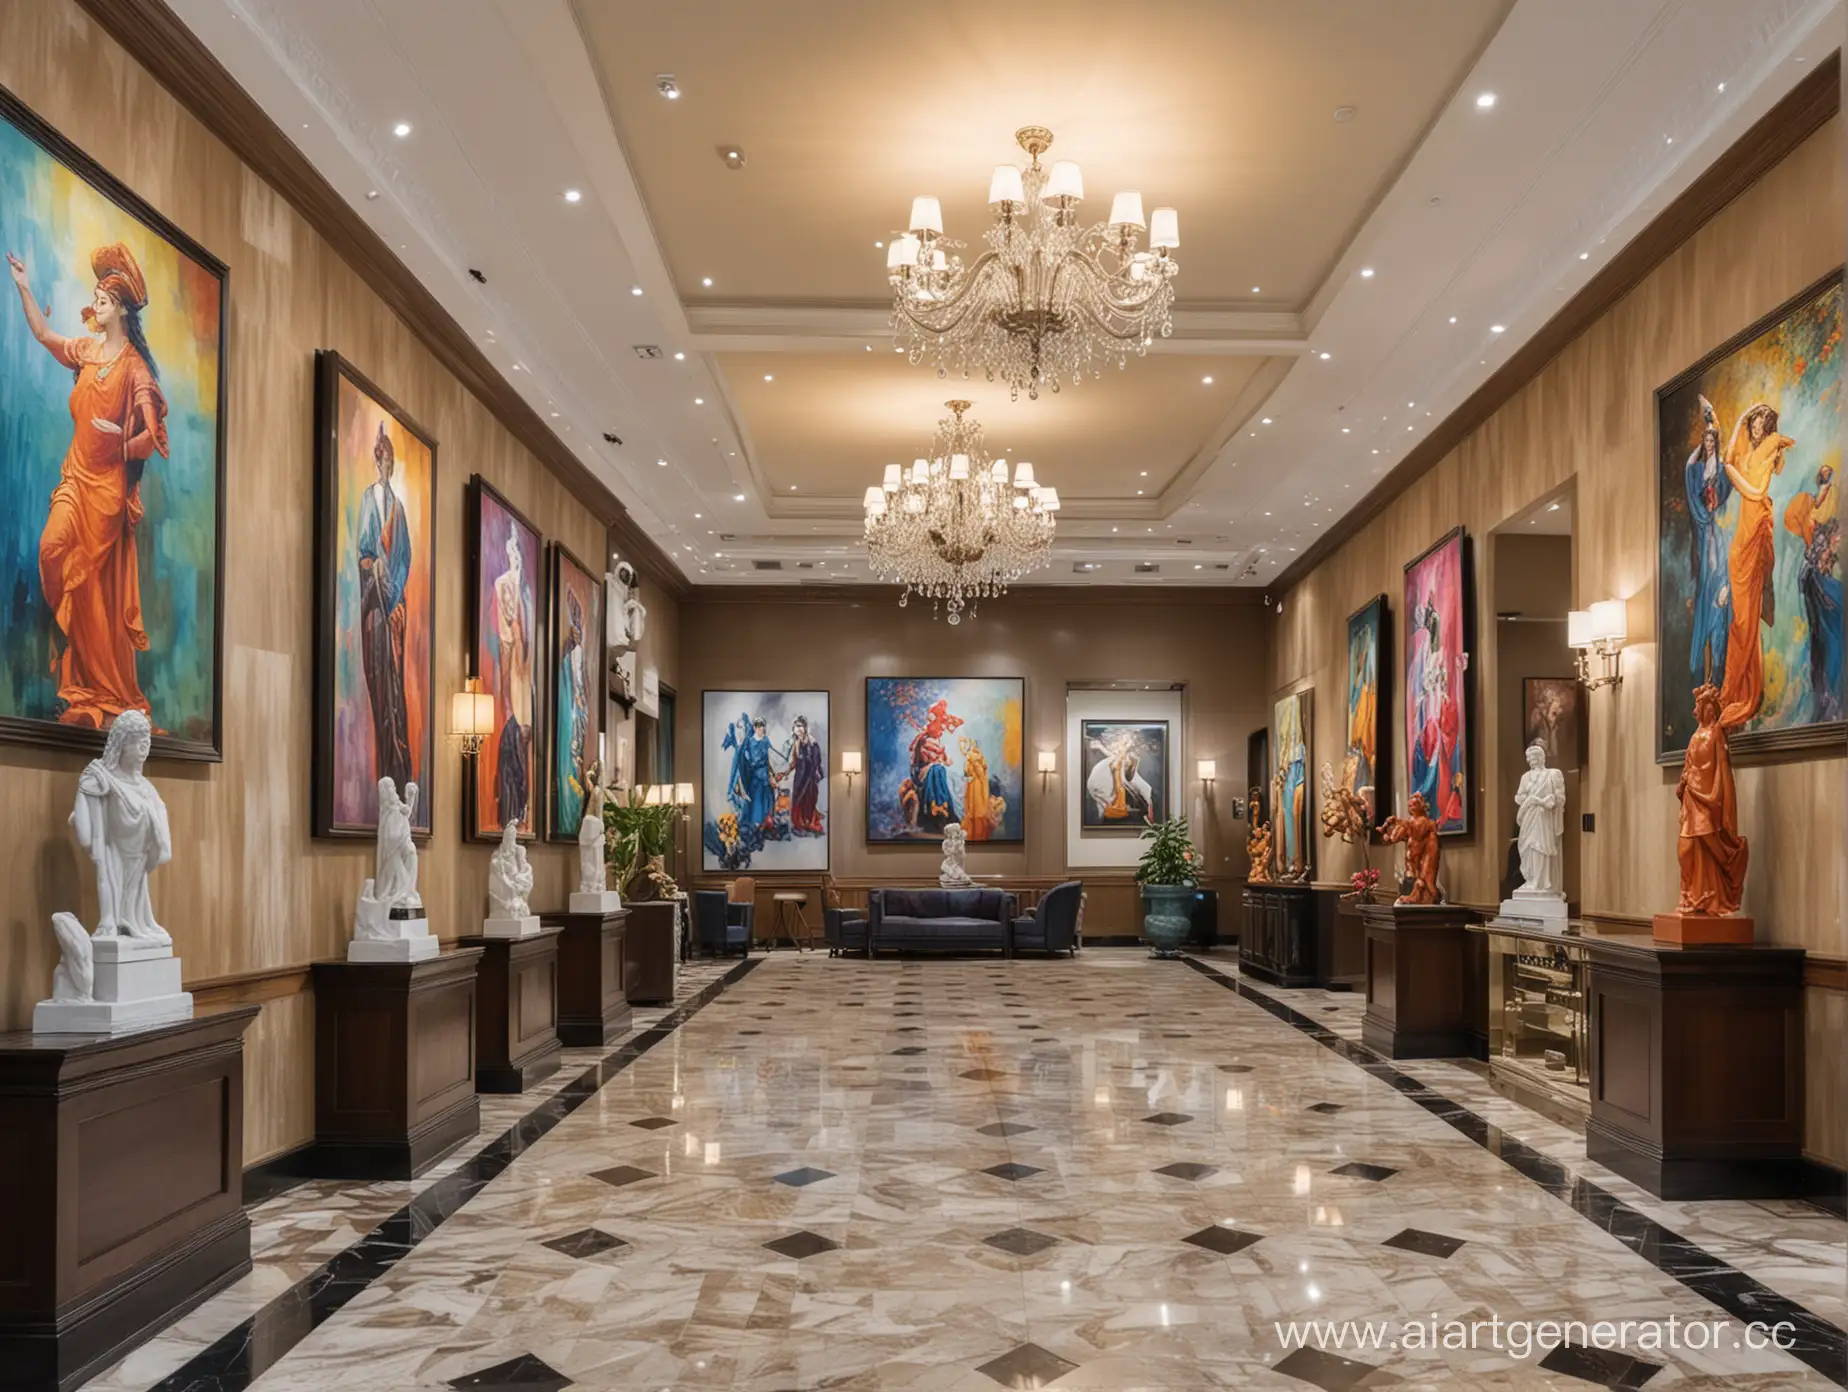 Artistic-Hotel-Lobby-Filled-with-Vibrant-Paintings-and-Elegant-Statues